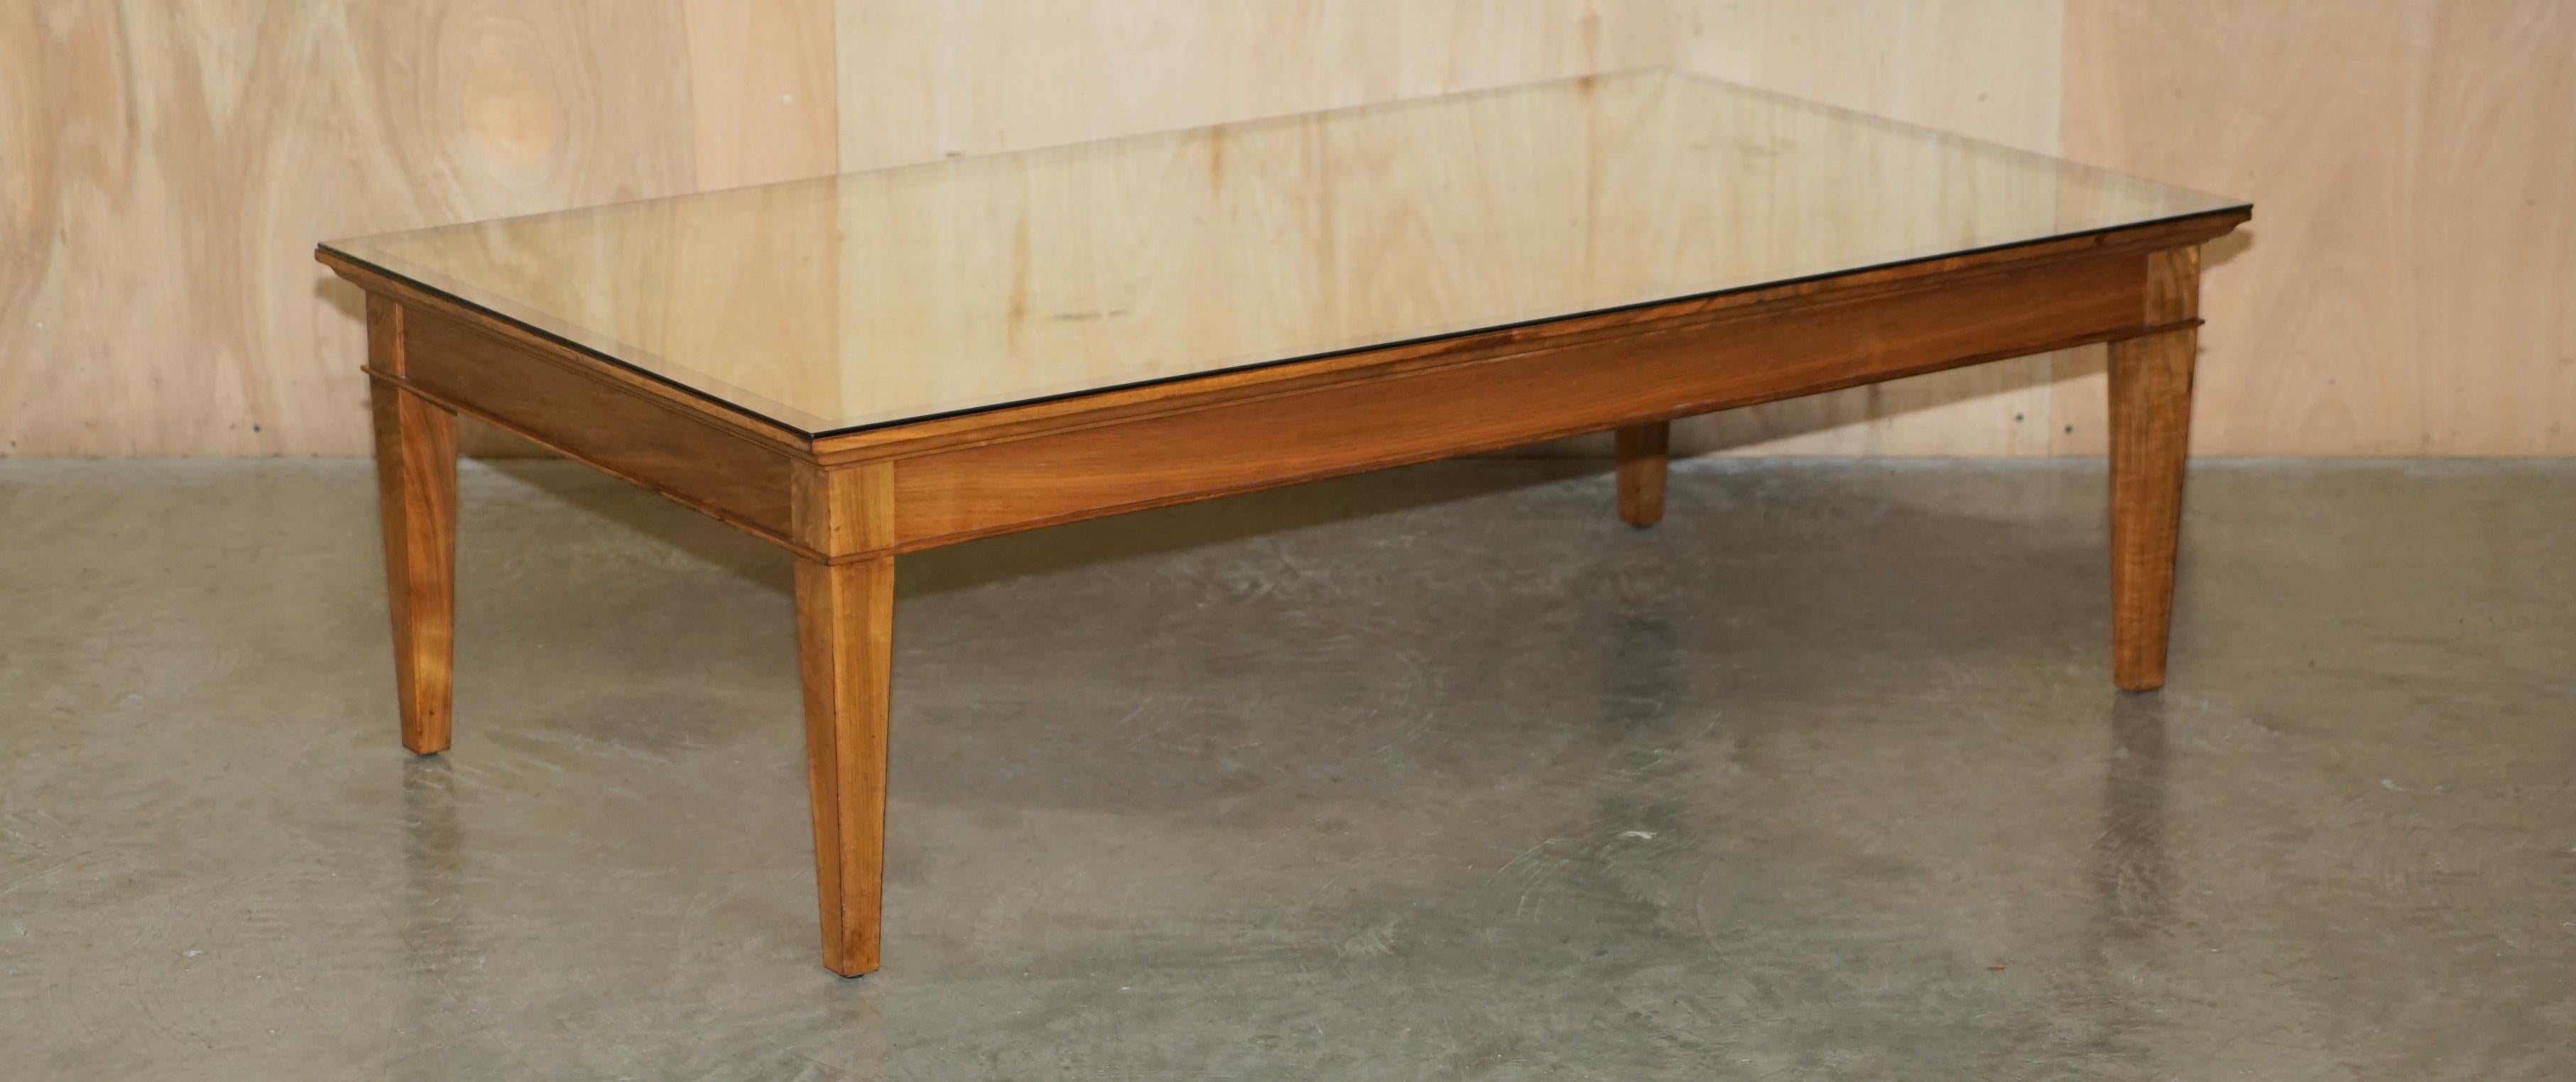 Mid-Century Modern VISCOUNT DAVID LINLEY SYCAMORE WALNUT WiTH CHROME COFFEE TABLE For Sale